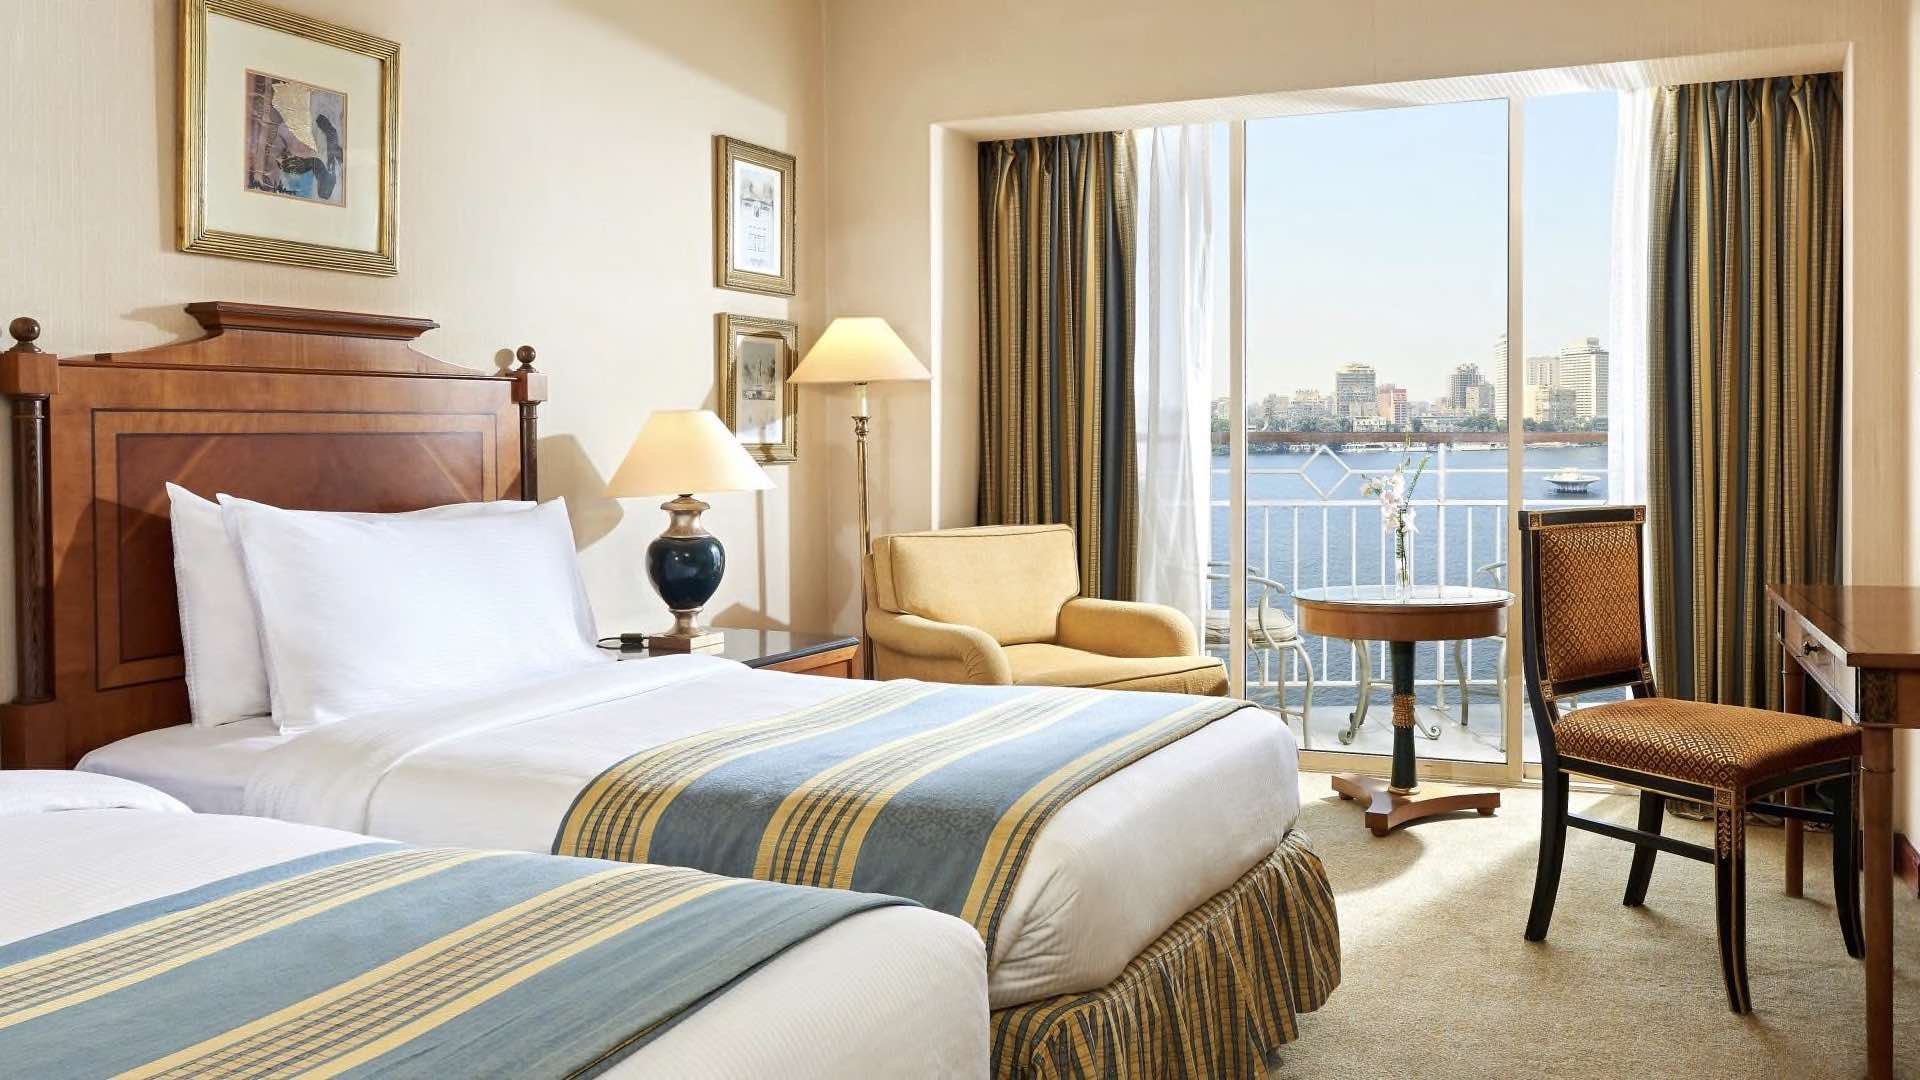 Bedroom with views at Grand Nile Tower